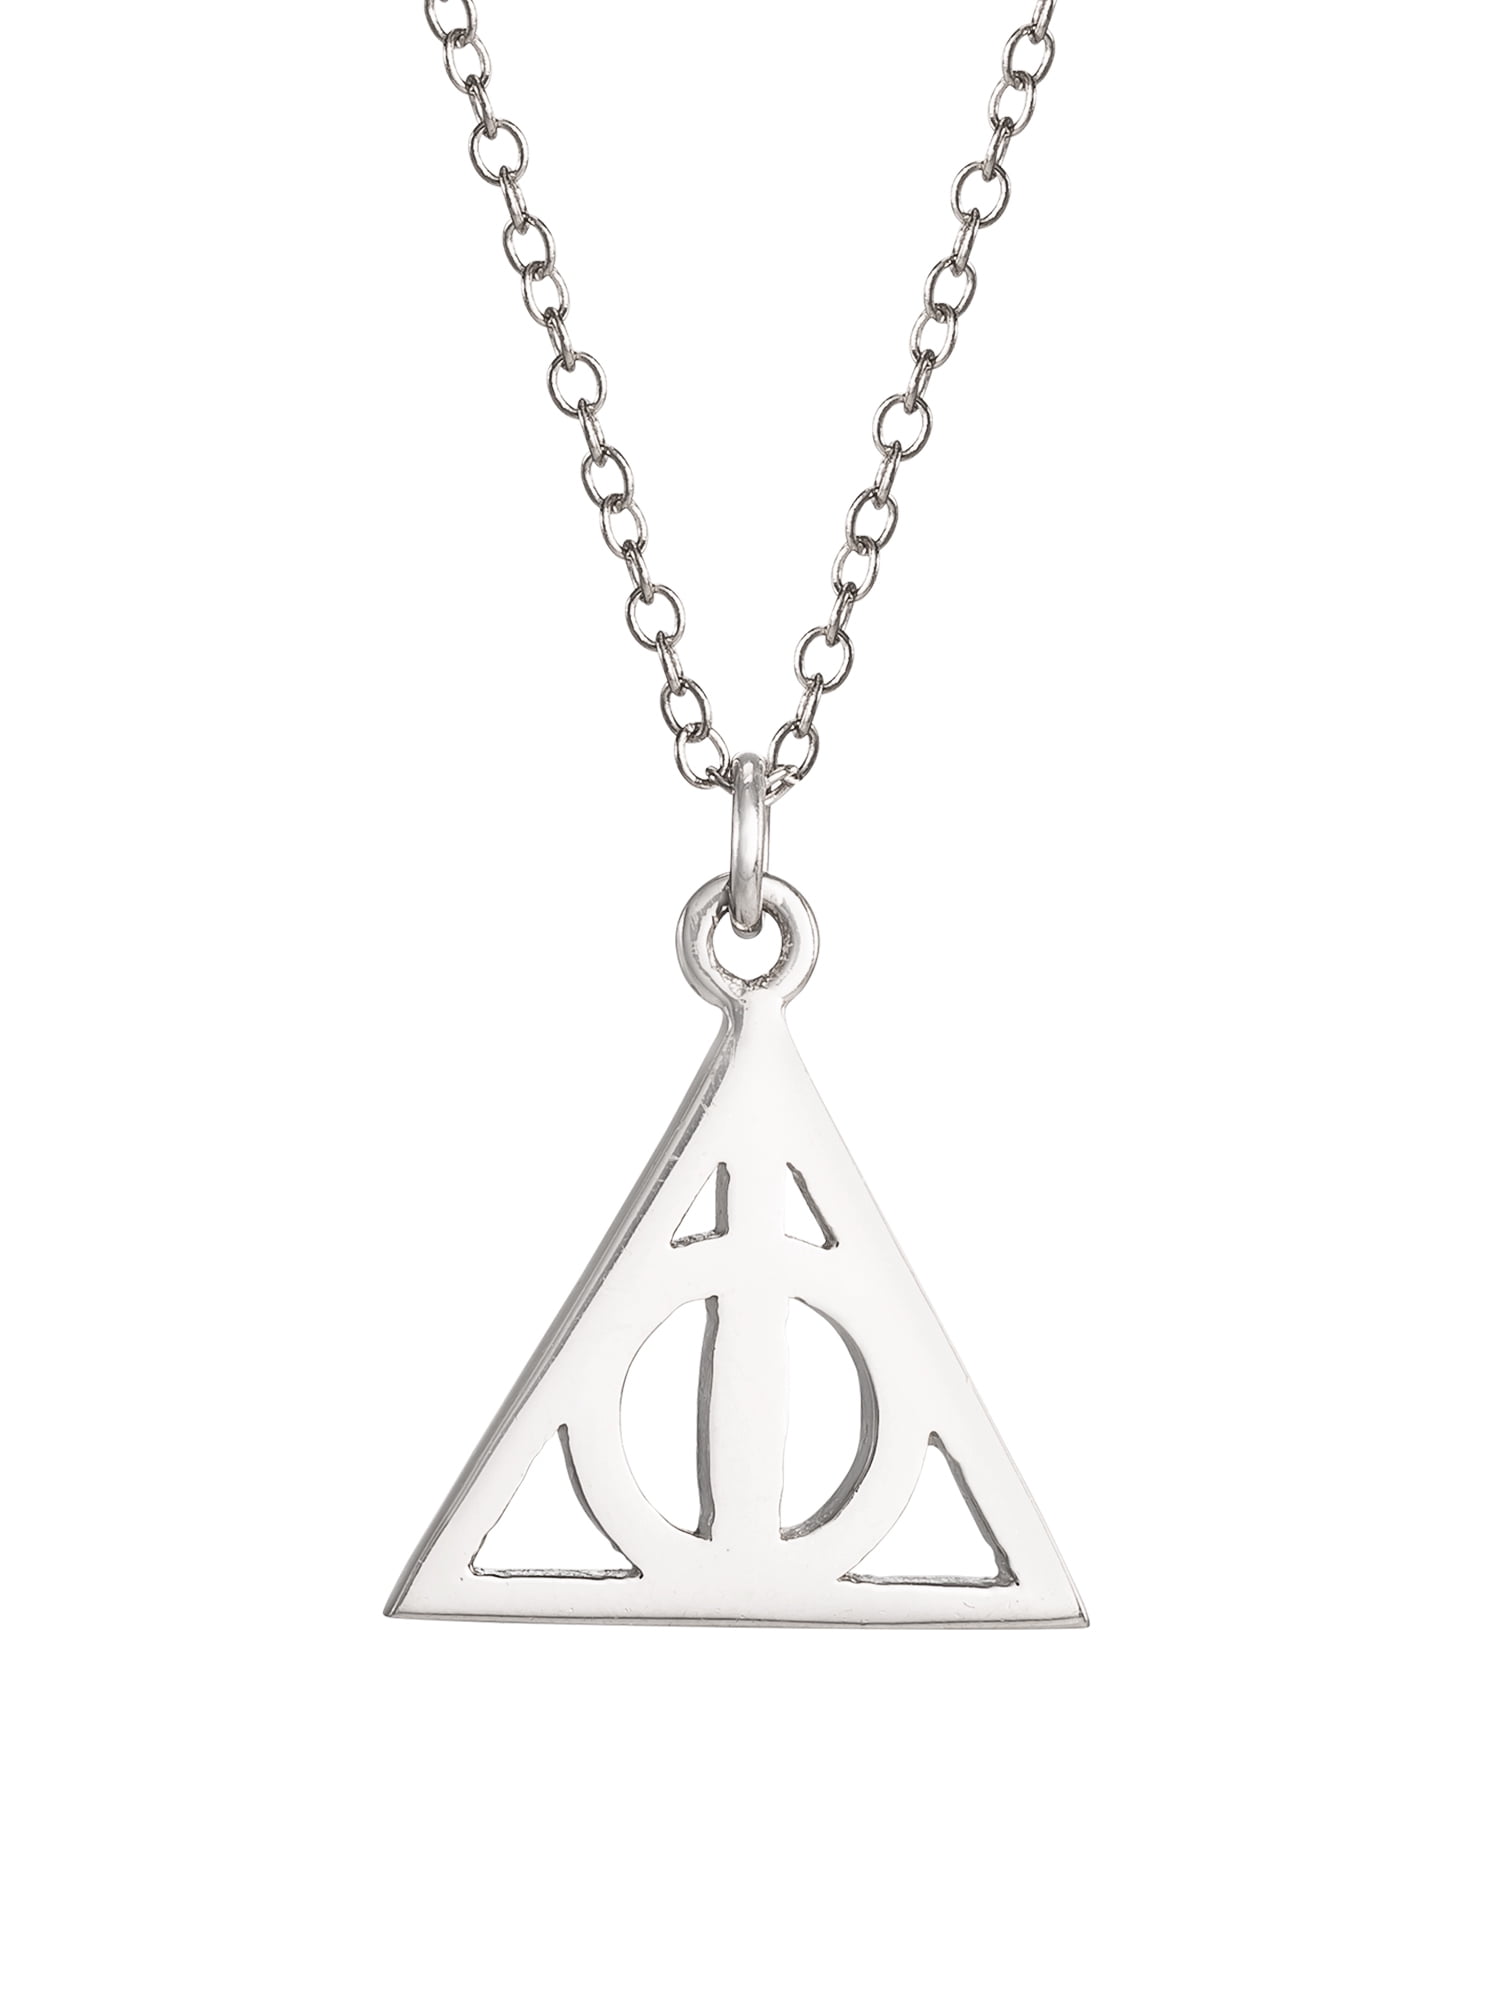 Silver Harry Potter Deathly Hallows Triangle Pendant Chain Necklace HP Film Fan 